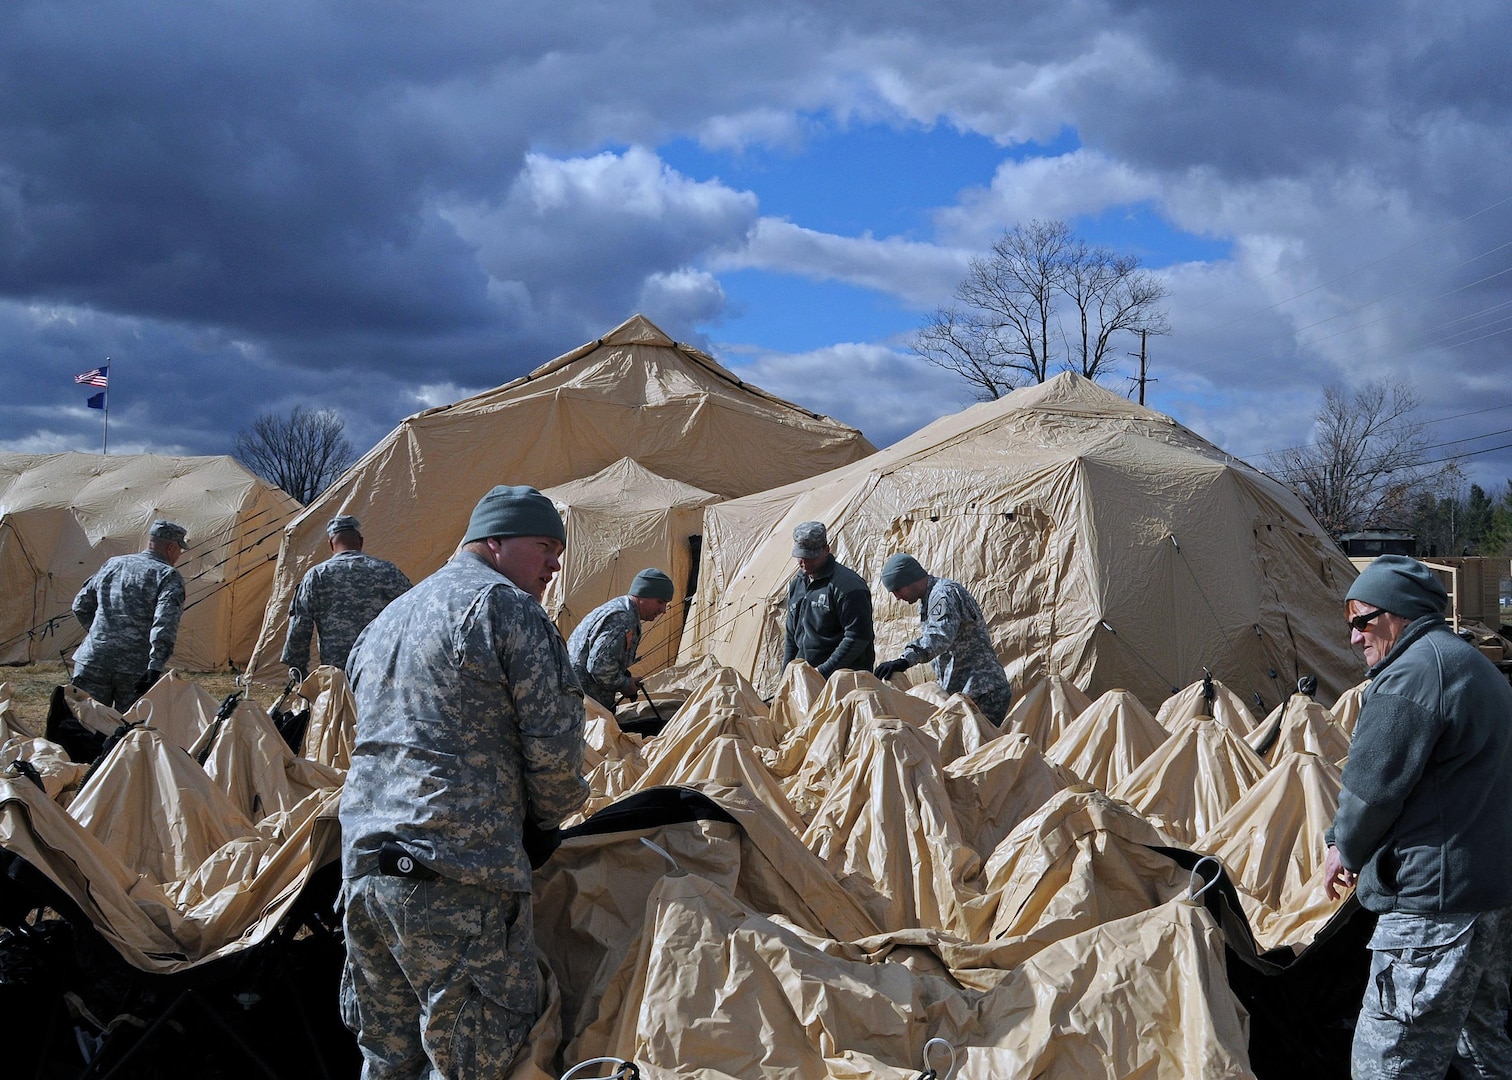 Soldiers from the 219th Battlefield Surveillance Brigade at Camp Atterbury
Joint Maneuver Training Center construct a Standardized Integrated Command Post System on Nov. 5, 2010 as training for their scheduled upcoming deployment to Iraq. A large tent provides more than 1,120 square feet of usable space. 